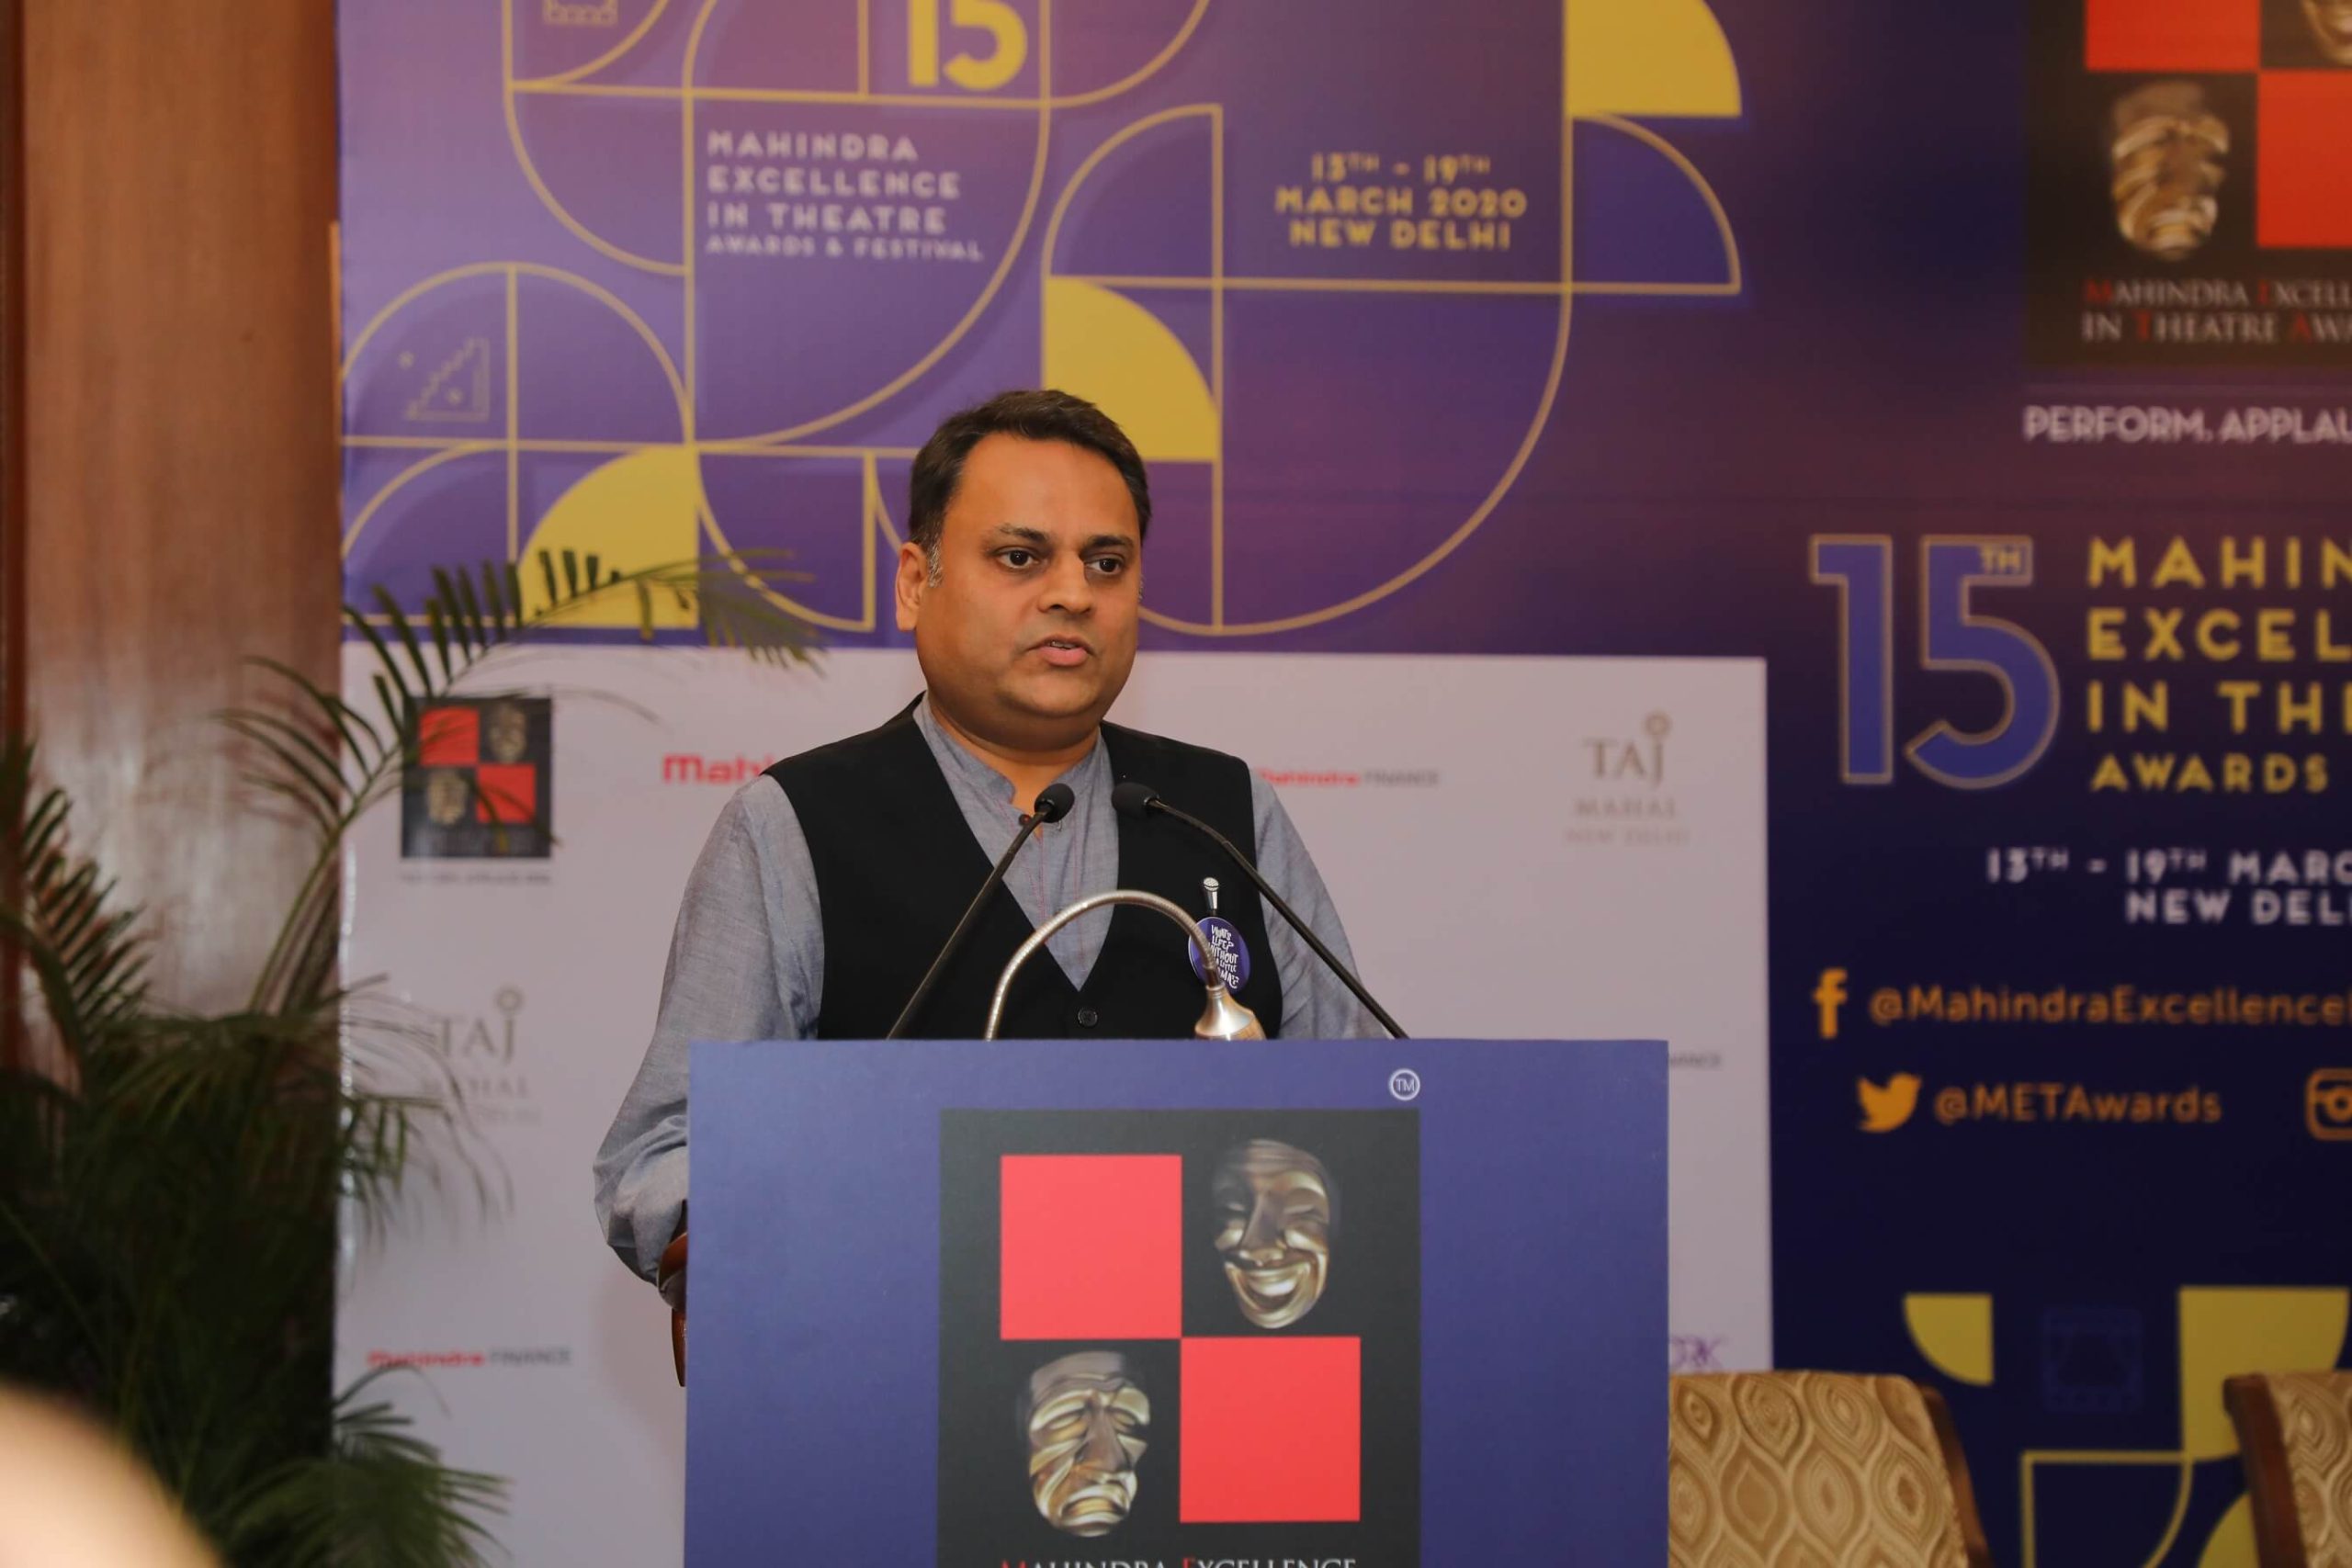 Jay Shah, Vice President and Head of Cultural Outreach, Mahindra Group